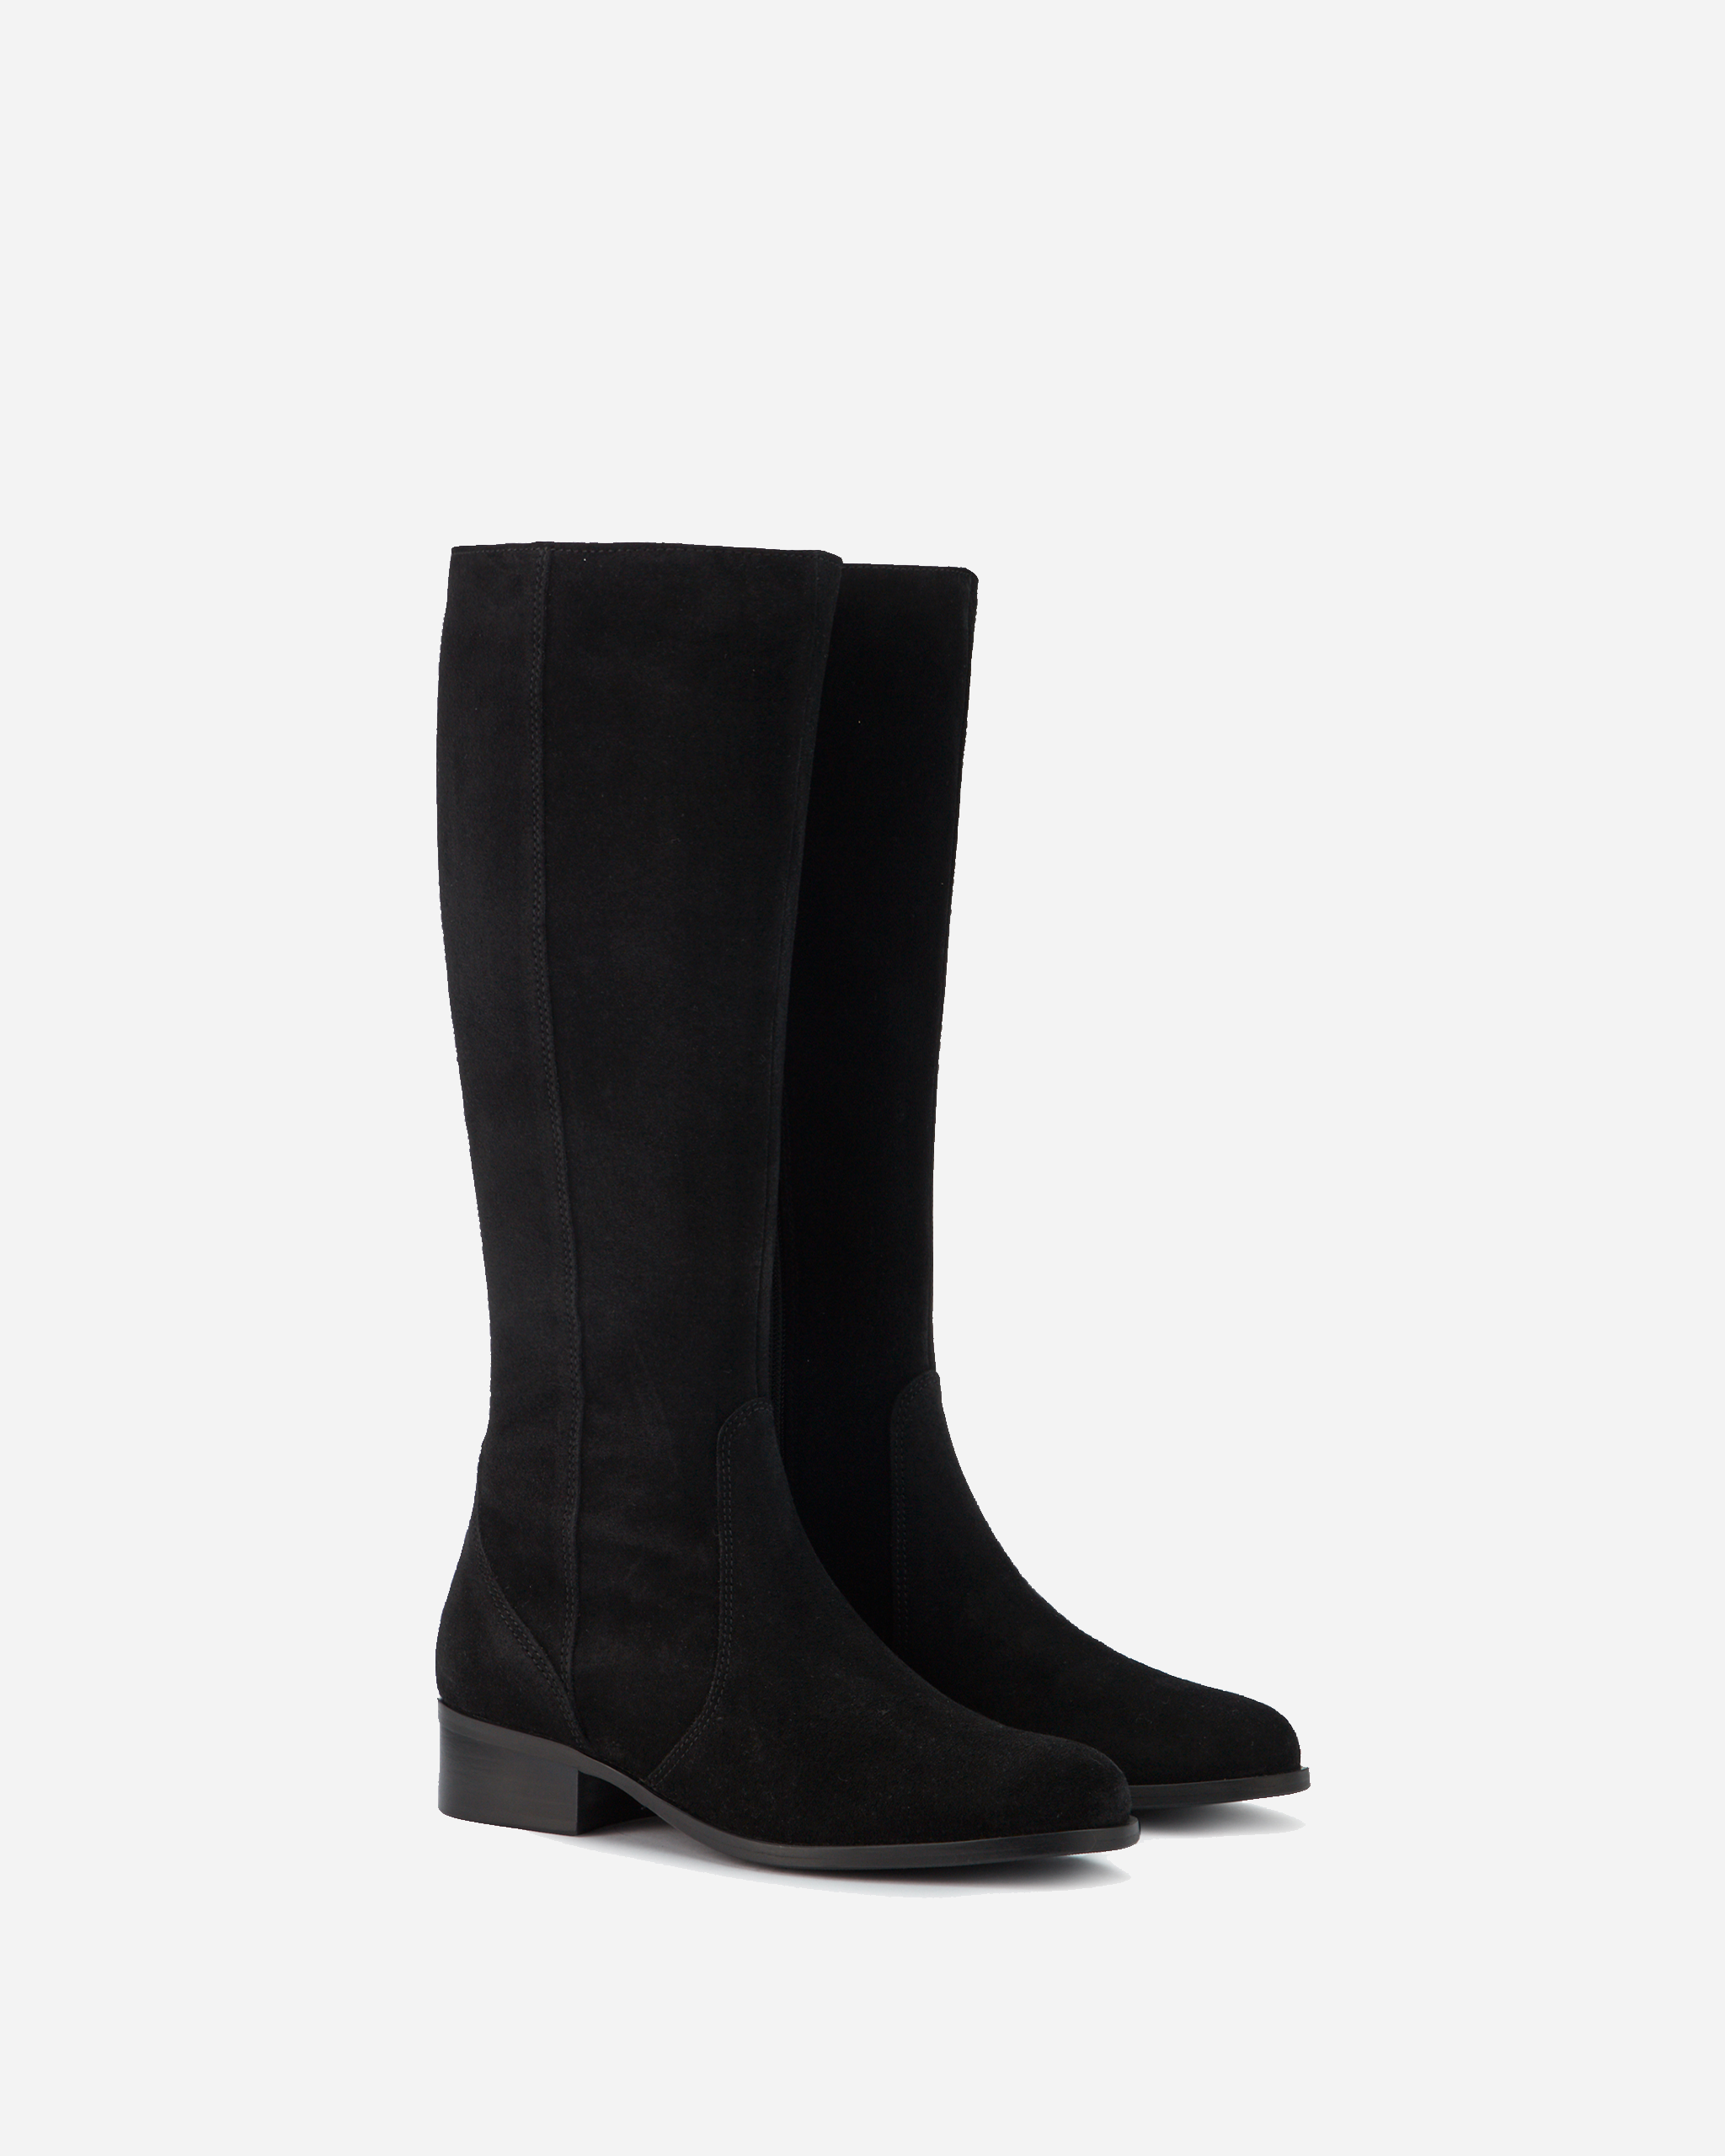 Knee high black suede leather boots